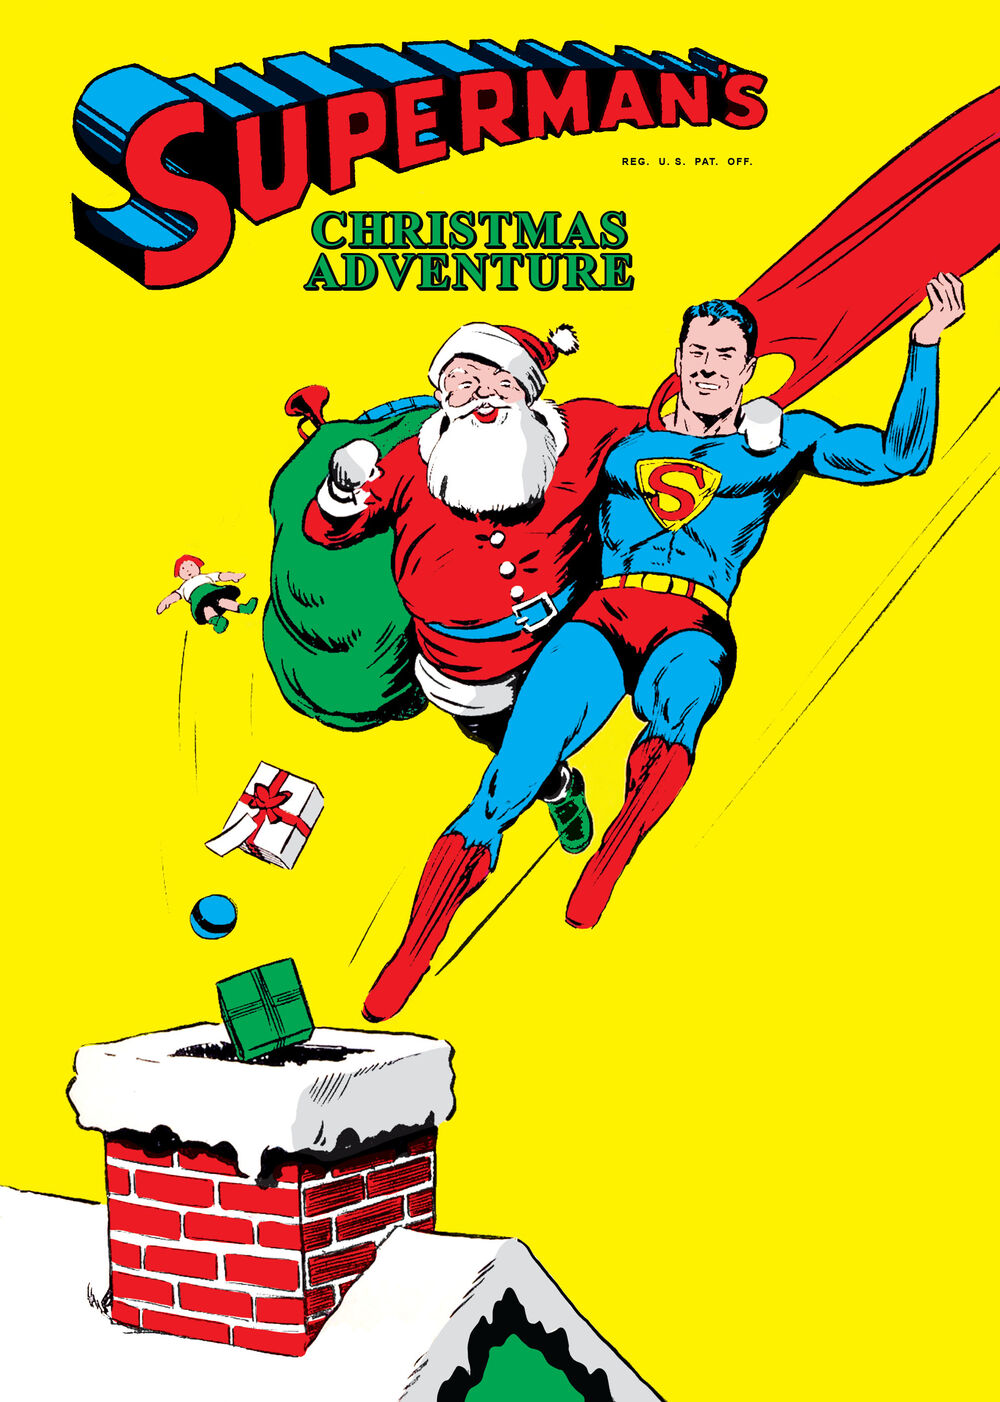 Superman flies toward a chimney holding Santa Claus who carries a bag of toys as they land.